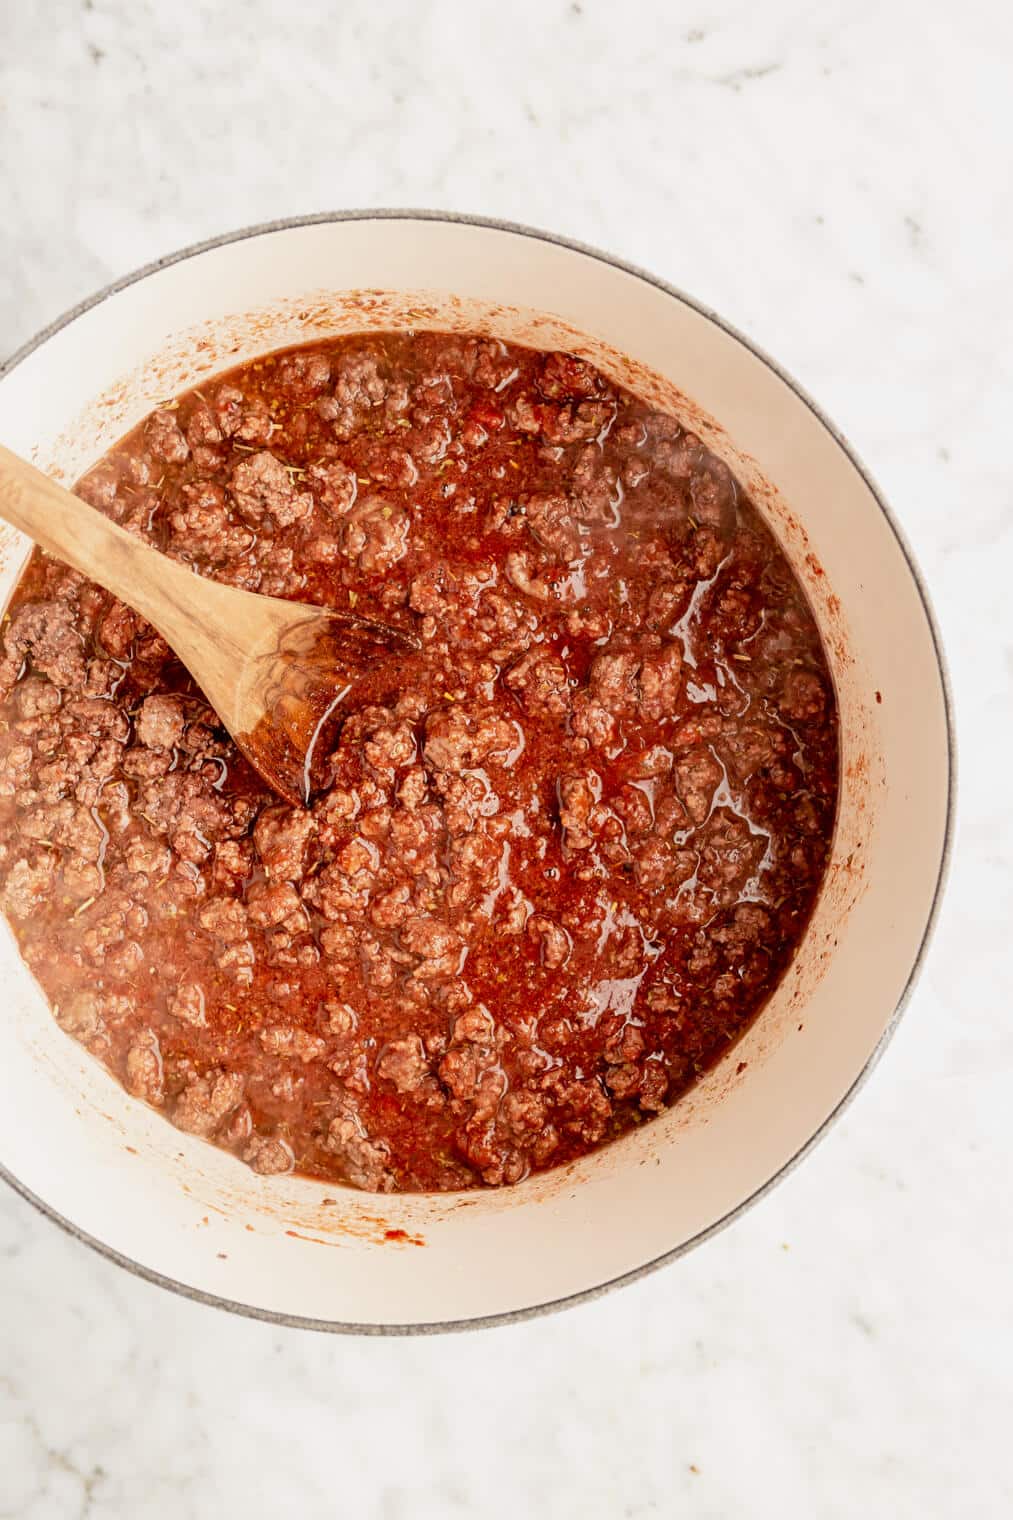 Ground beef in a tomato and wine sauce in a round, white casserole dish with a wooden spoon resting inside.